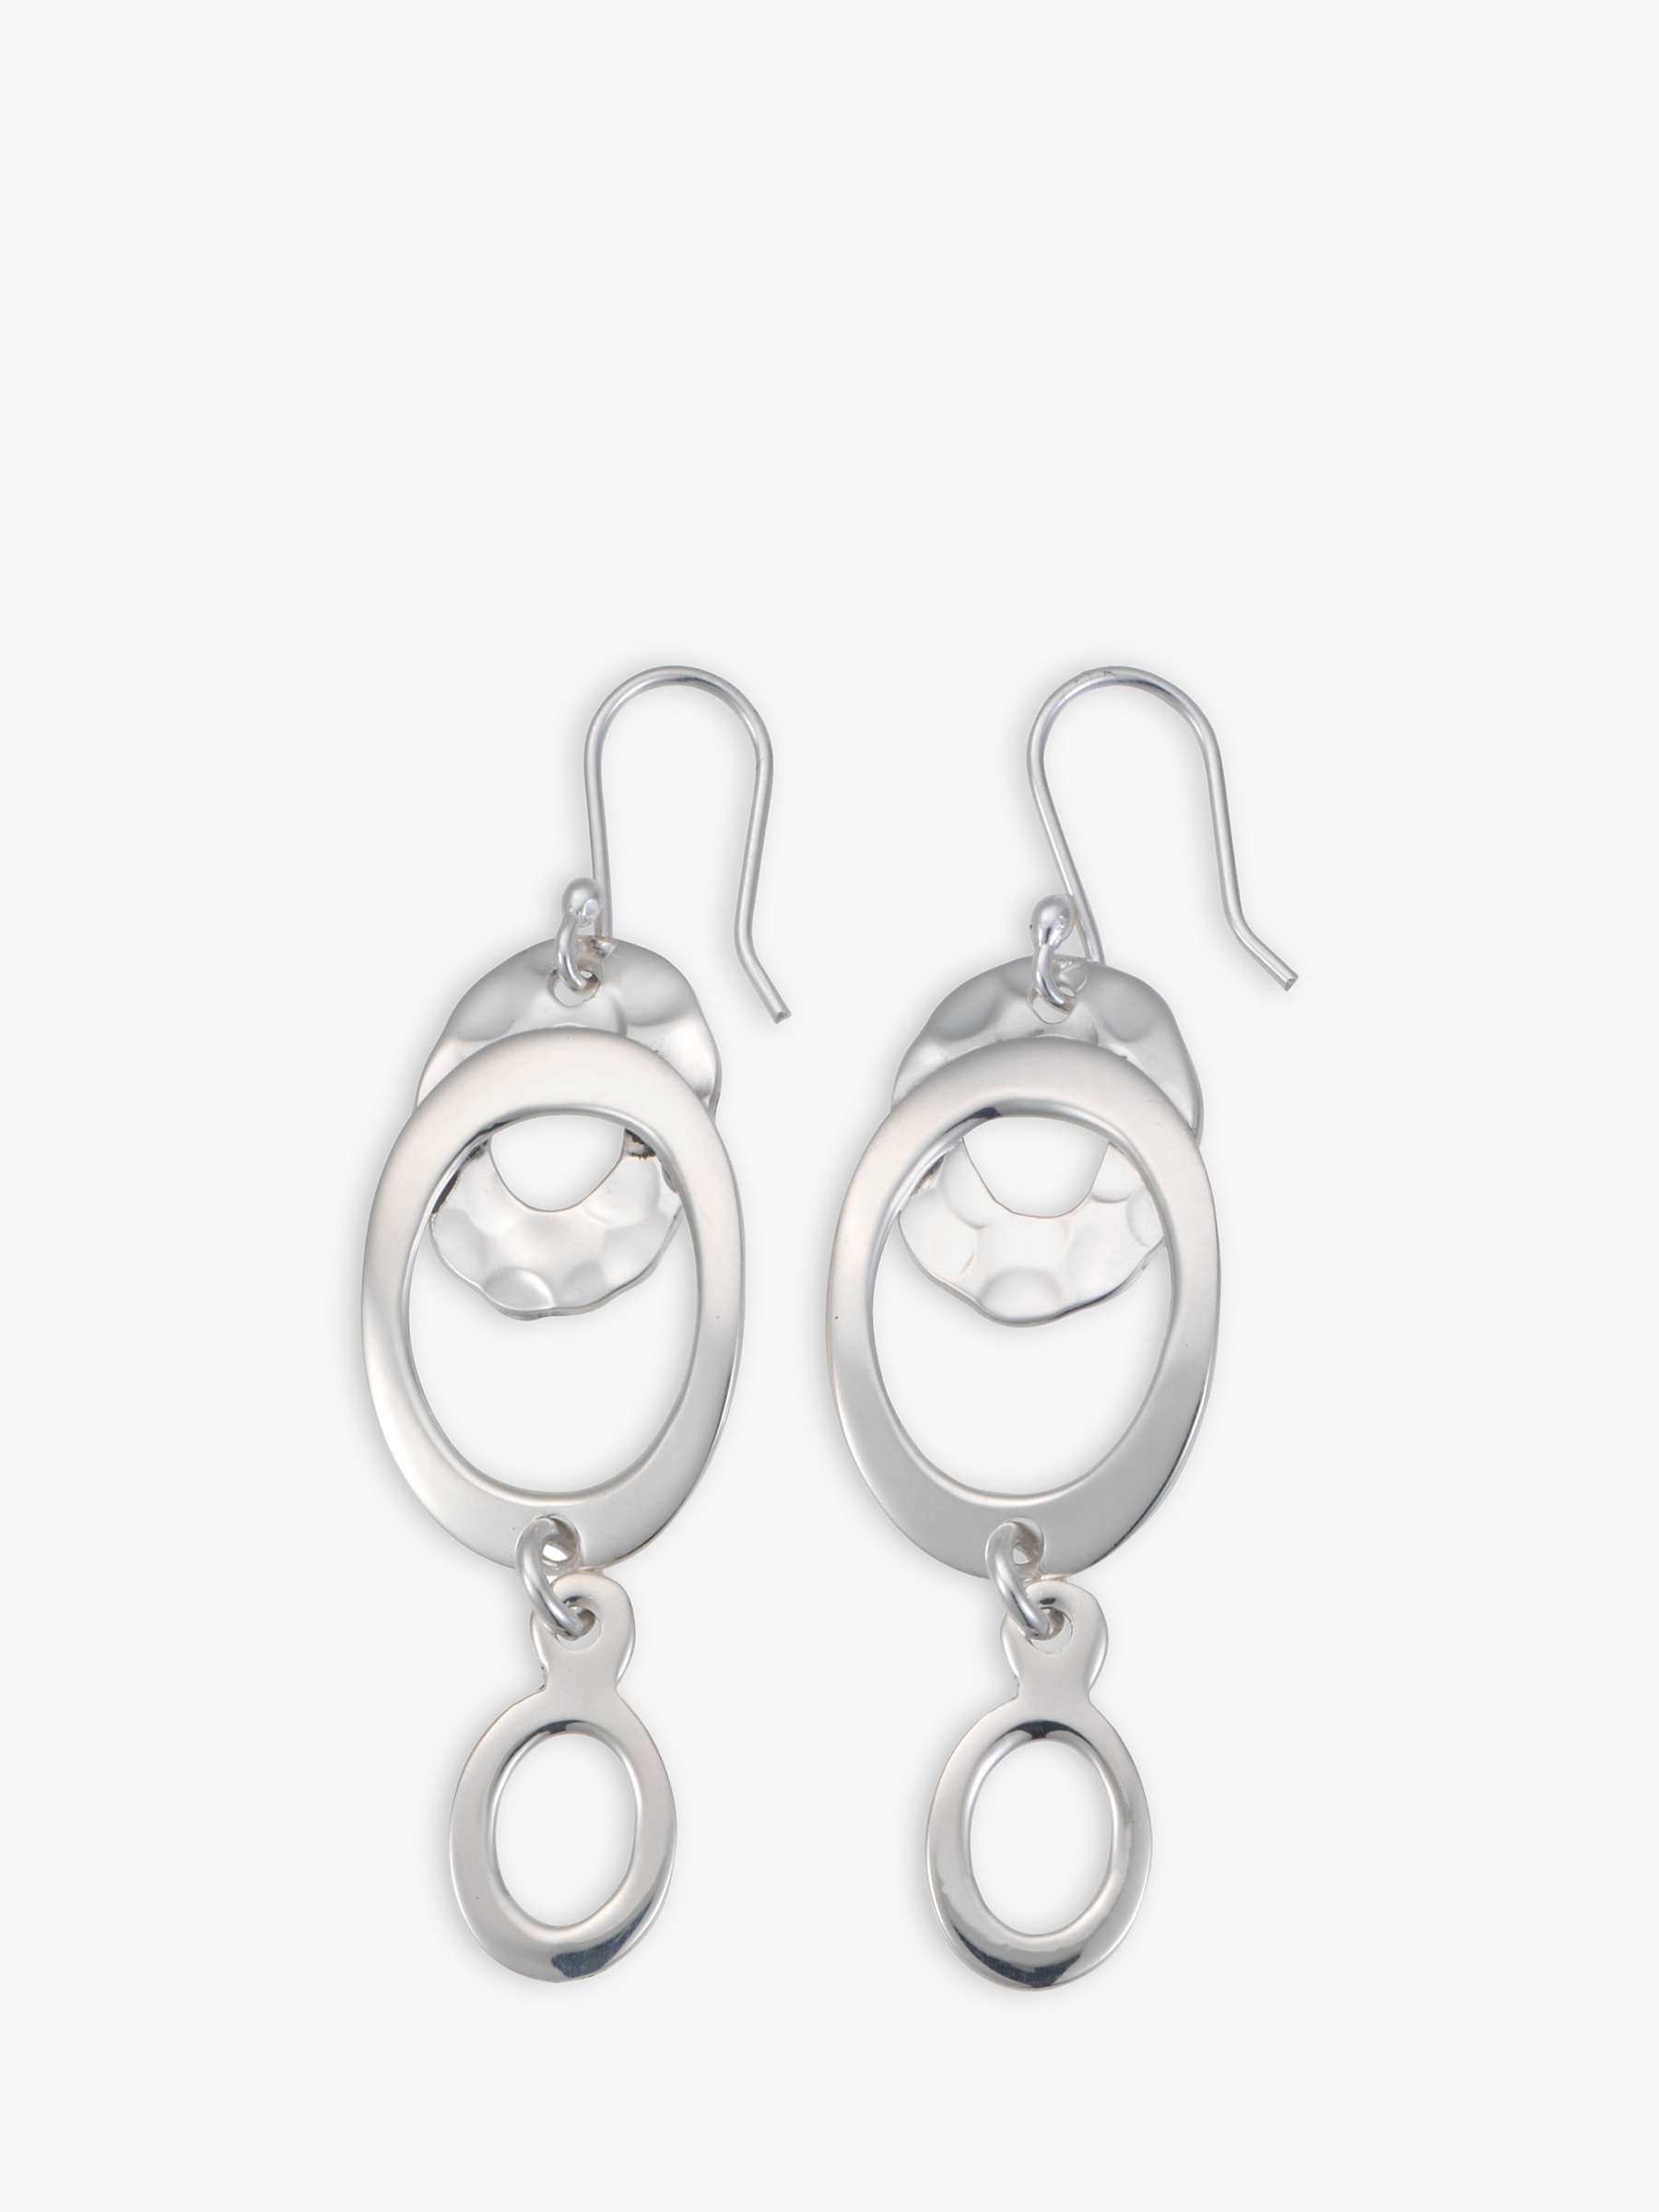 Buy Andea Hammered Open Oval Drop Earrings Online at johnlewis.com